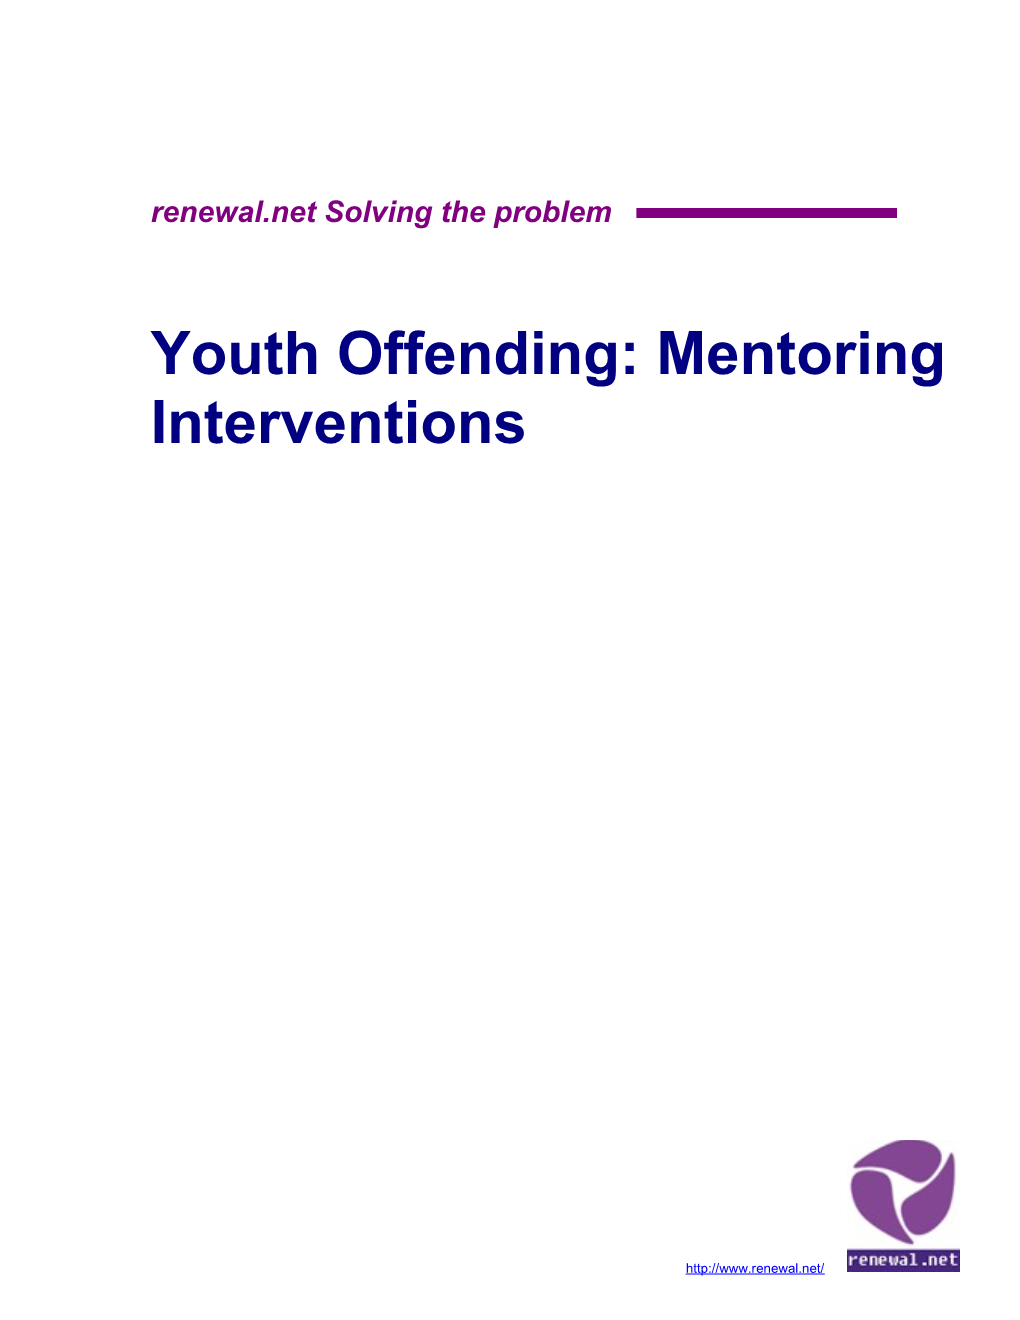 Youth Offending: Mentoring Interventions